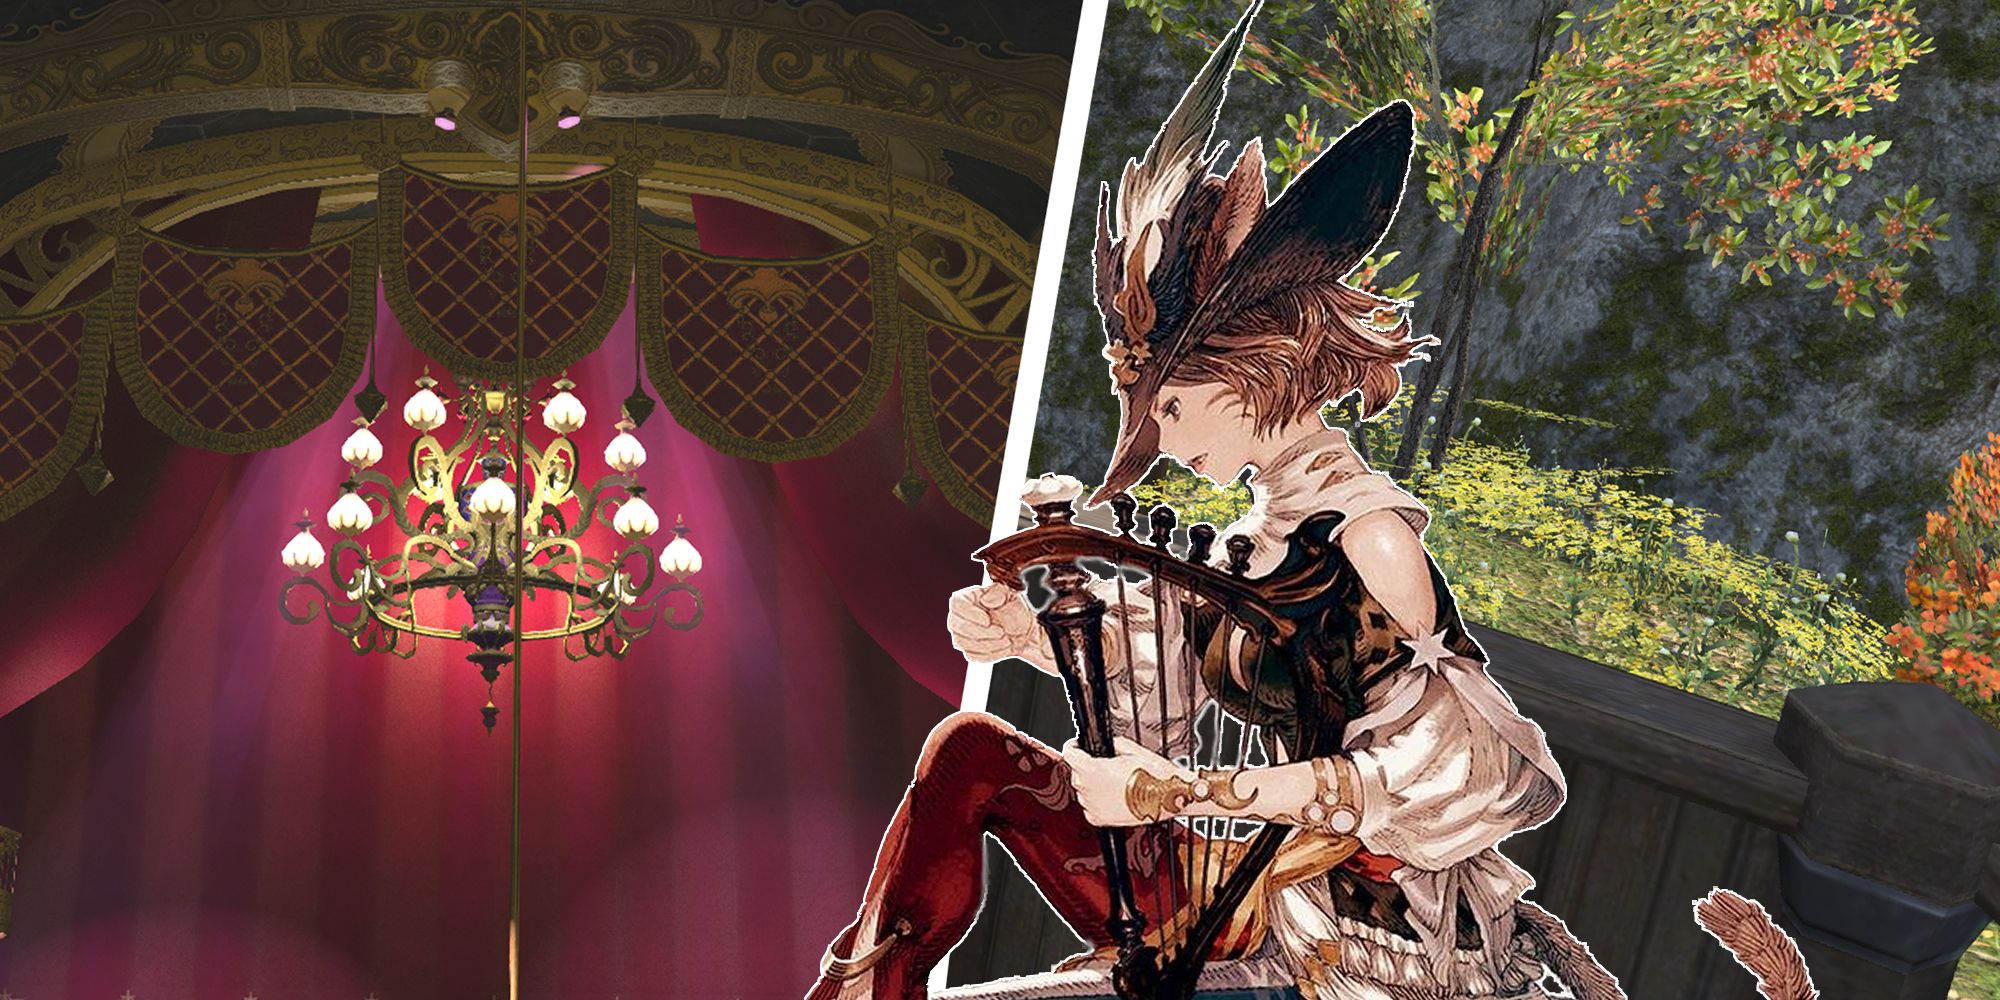 A picture of concept art of the Bard from Final Fantasy 14, split between a lush Gridanian forest and an elaborate stage with a chandelier. 